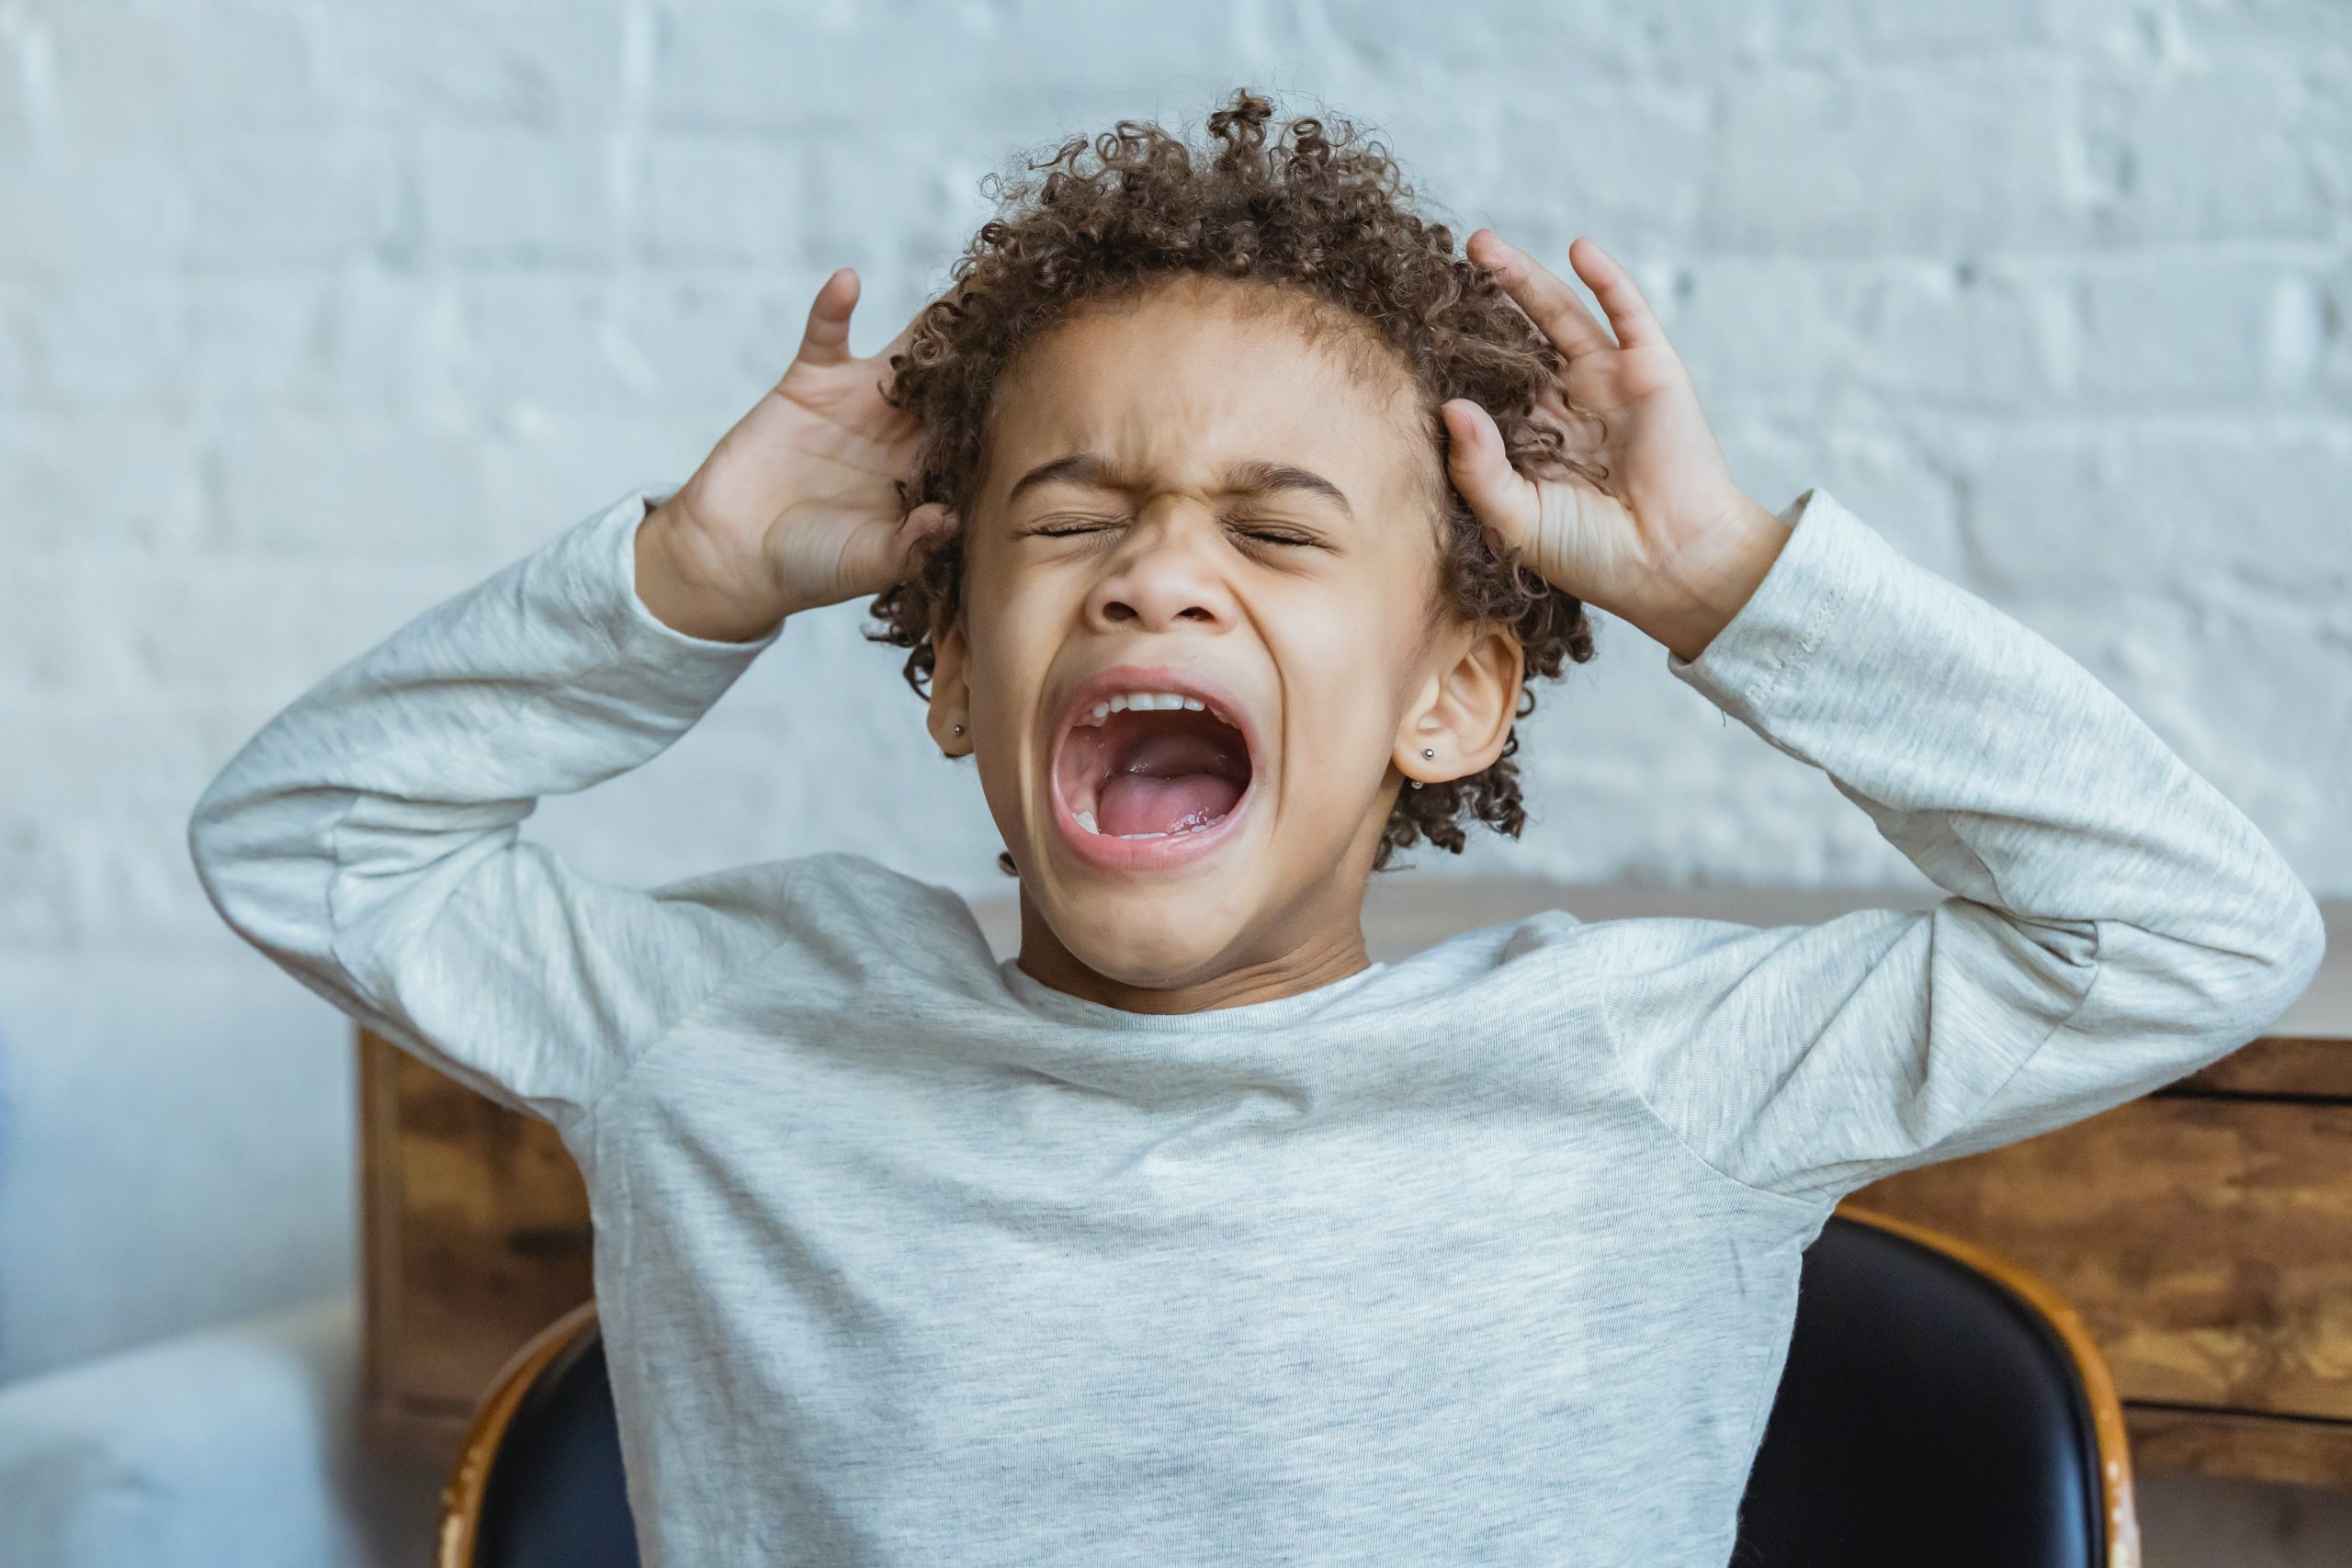 Frustrated child screaming, hands on head, standing against a blurred brick wall background. 